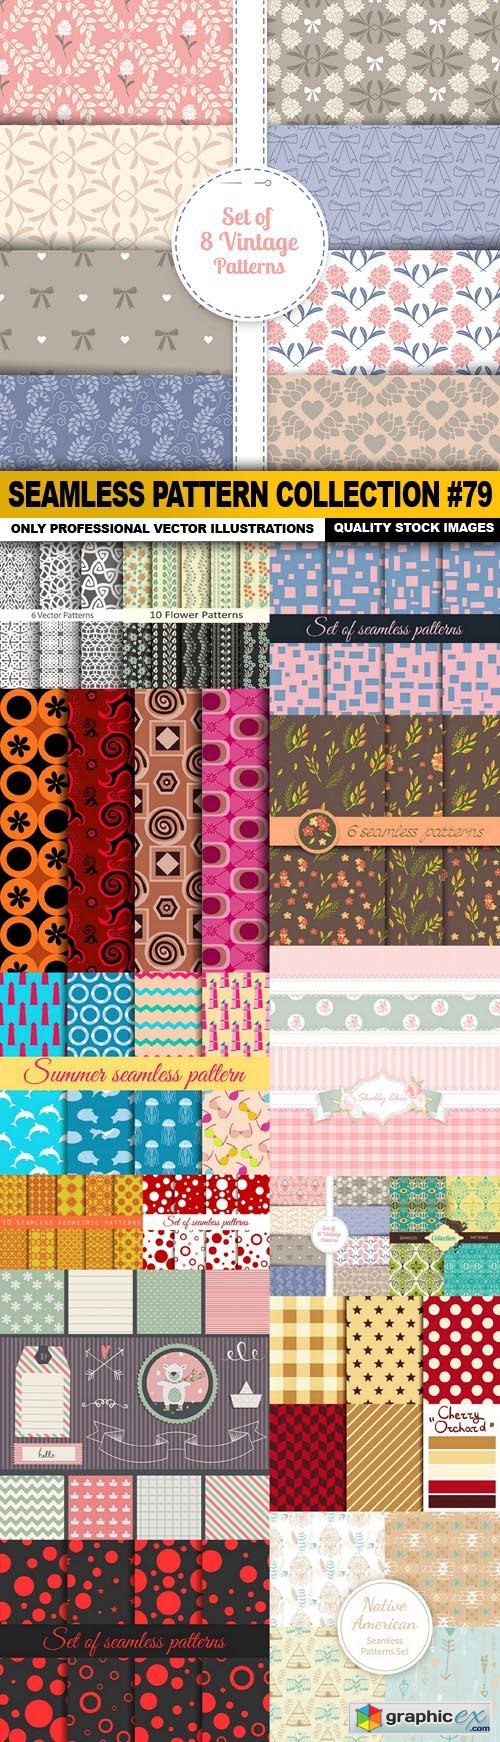 Seamless Pattern Collection #79